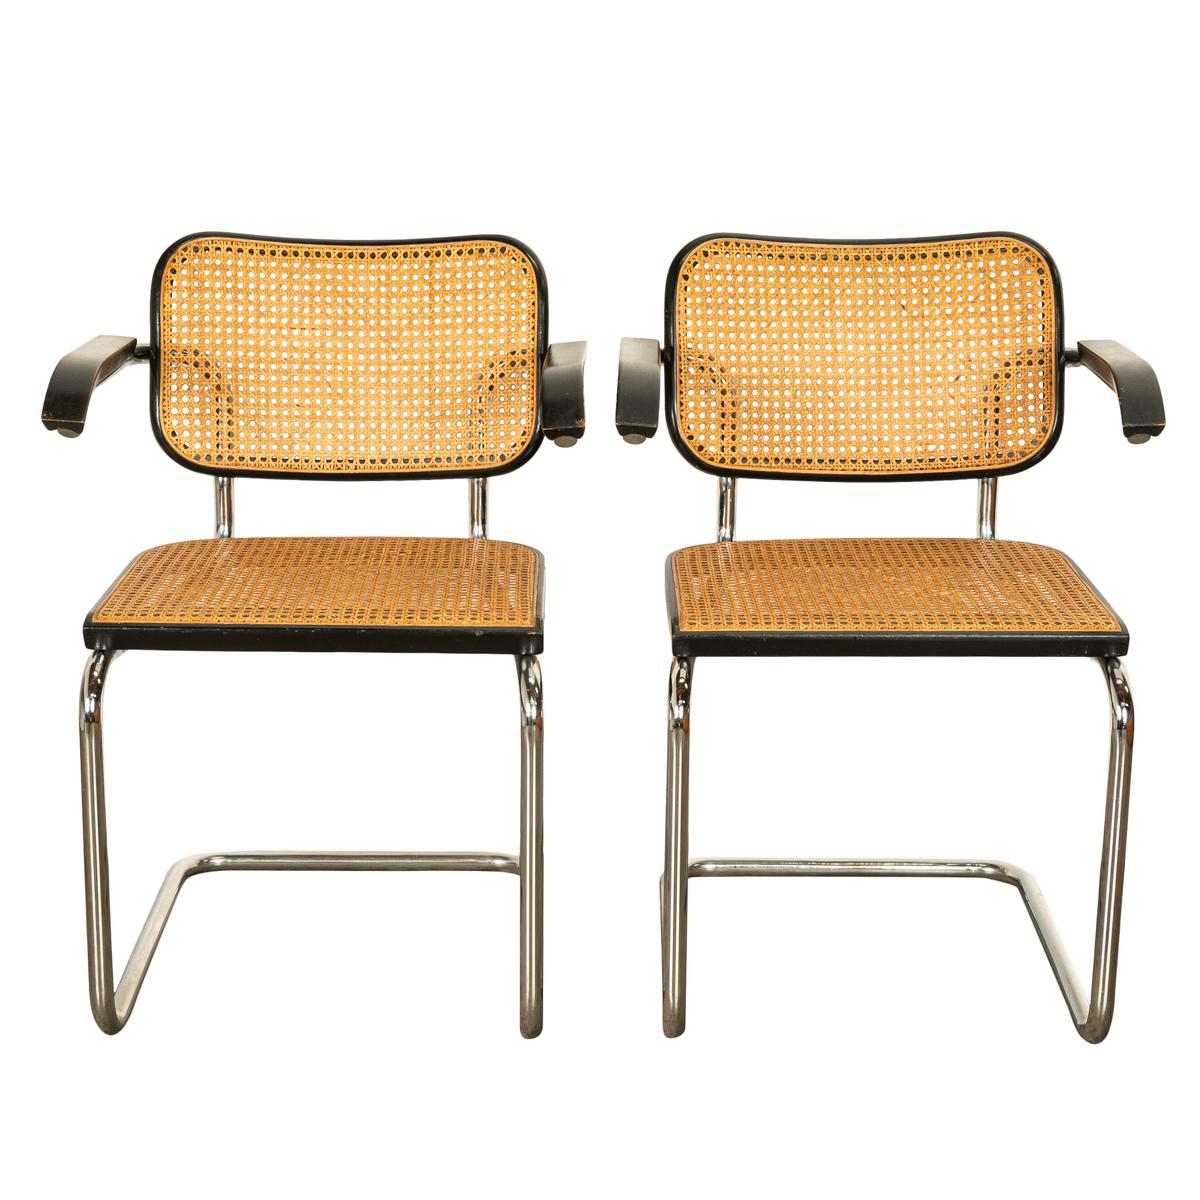 A good pair of original Mid Century Cesca armchairs, designed by Marcel Breuer and made by Knoll International in 1974.
Breuer designed this iconic classic in 1928, the cantilevered frame is made from tubular steel and the seat and chair back are